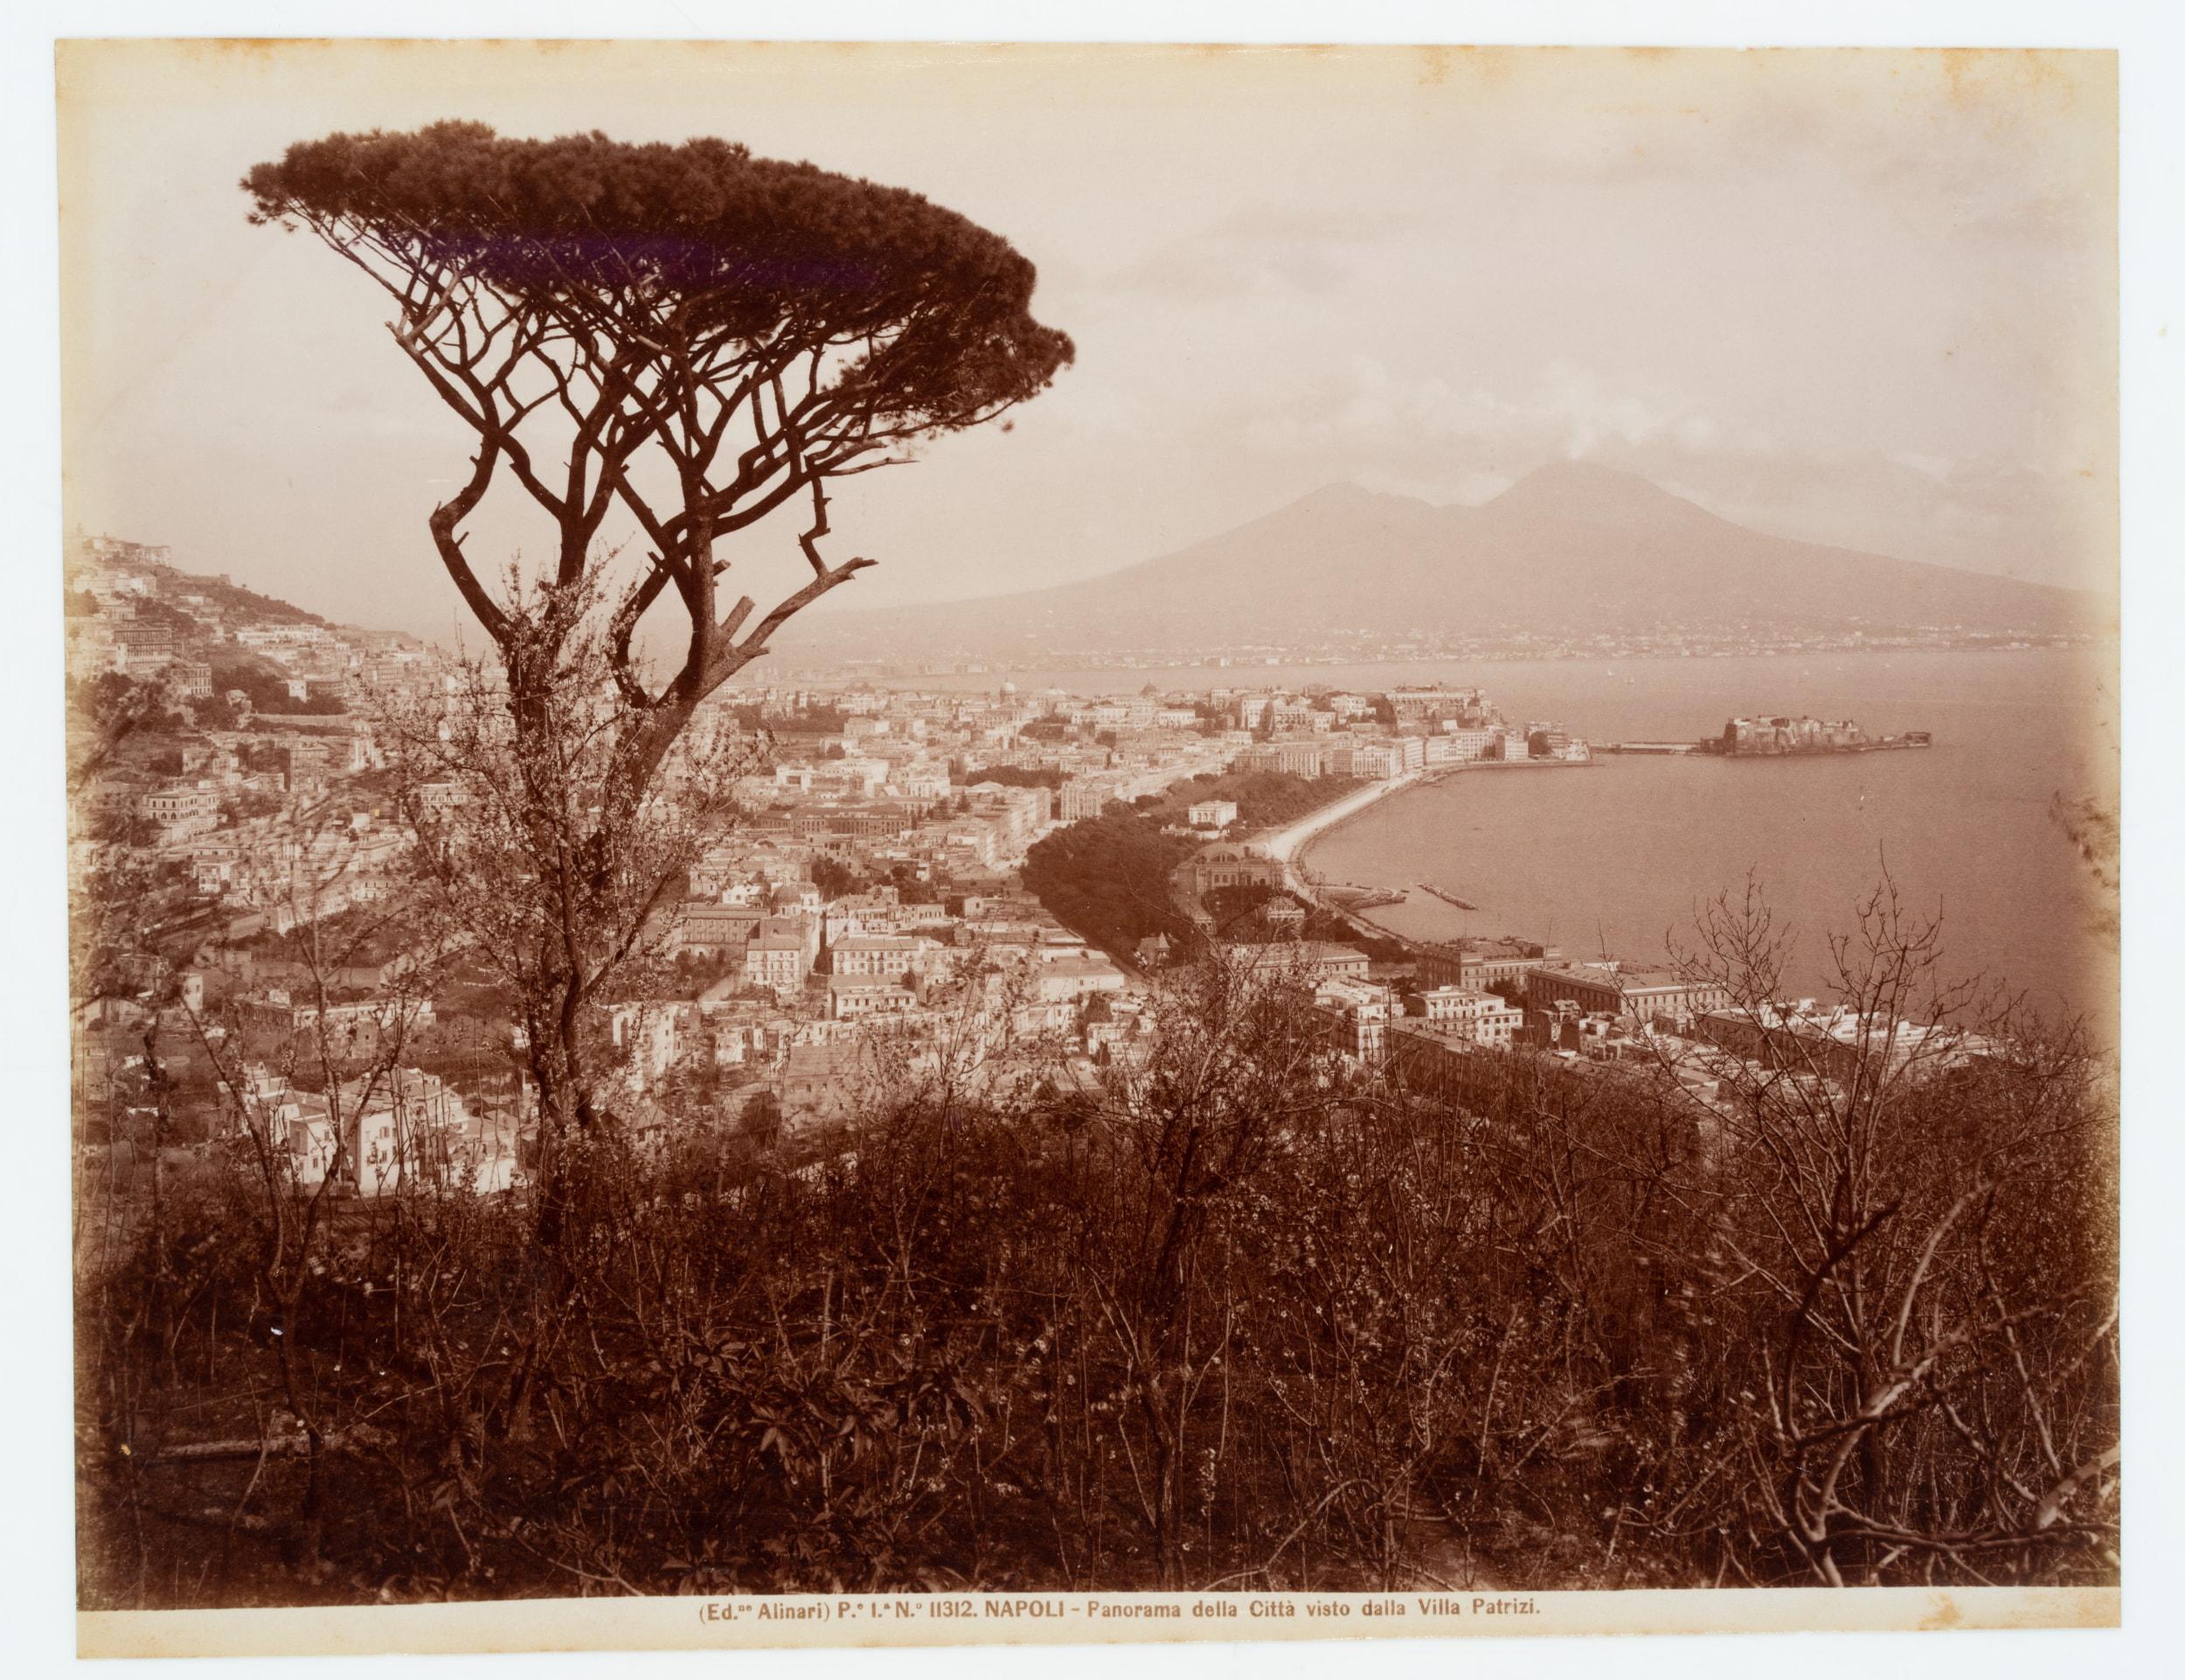 Fratelli Alinari (19th century): Panoramic view with pine tree from Villa Patrizi on the coast of Naples, the sea and Visuv in the distance, c. 1880, albumen paper print

Technique: albumen paper print

Inscription: Lower middle signed in the